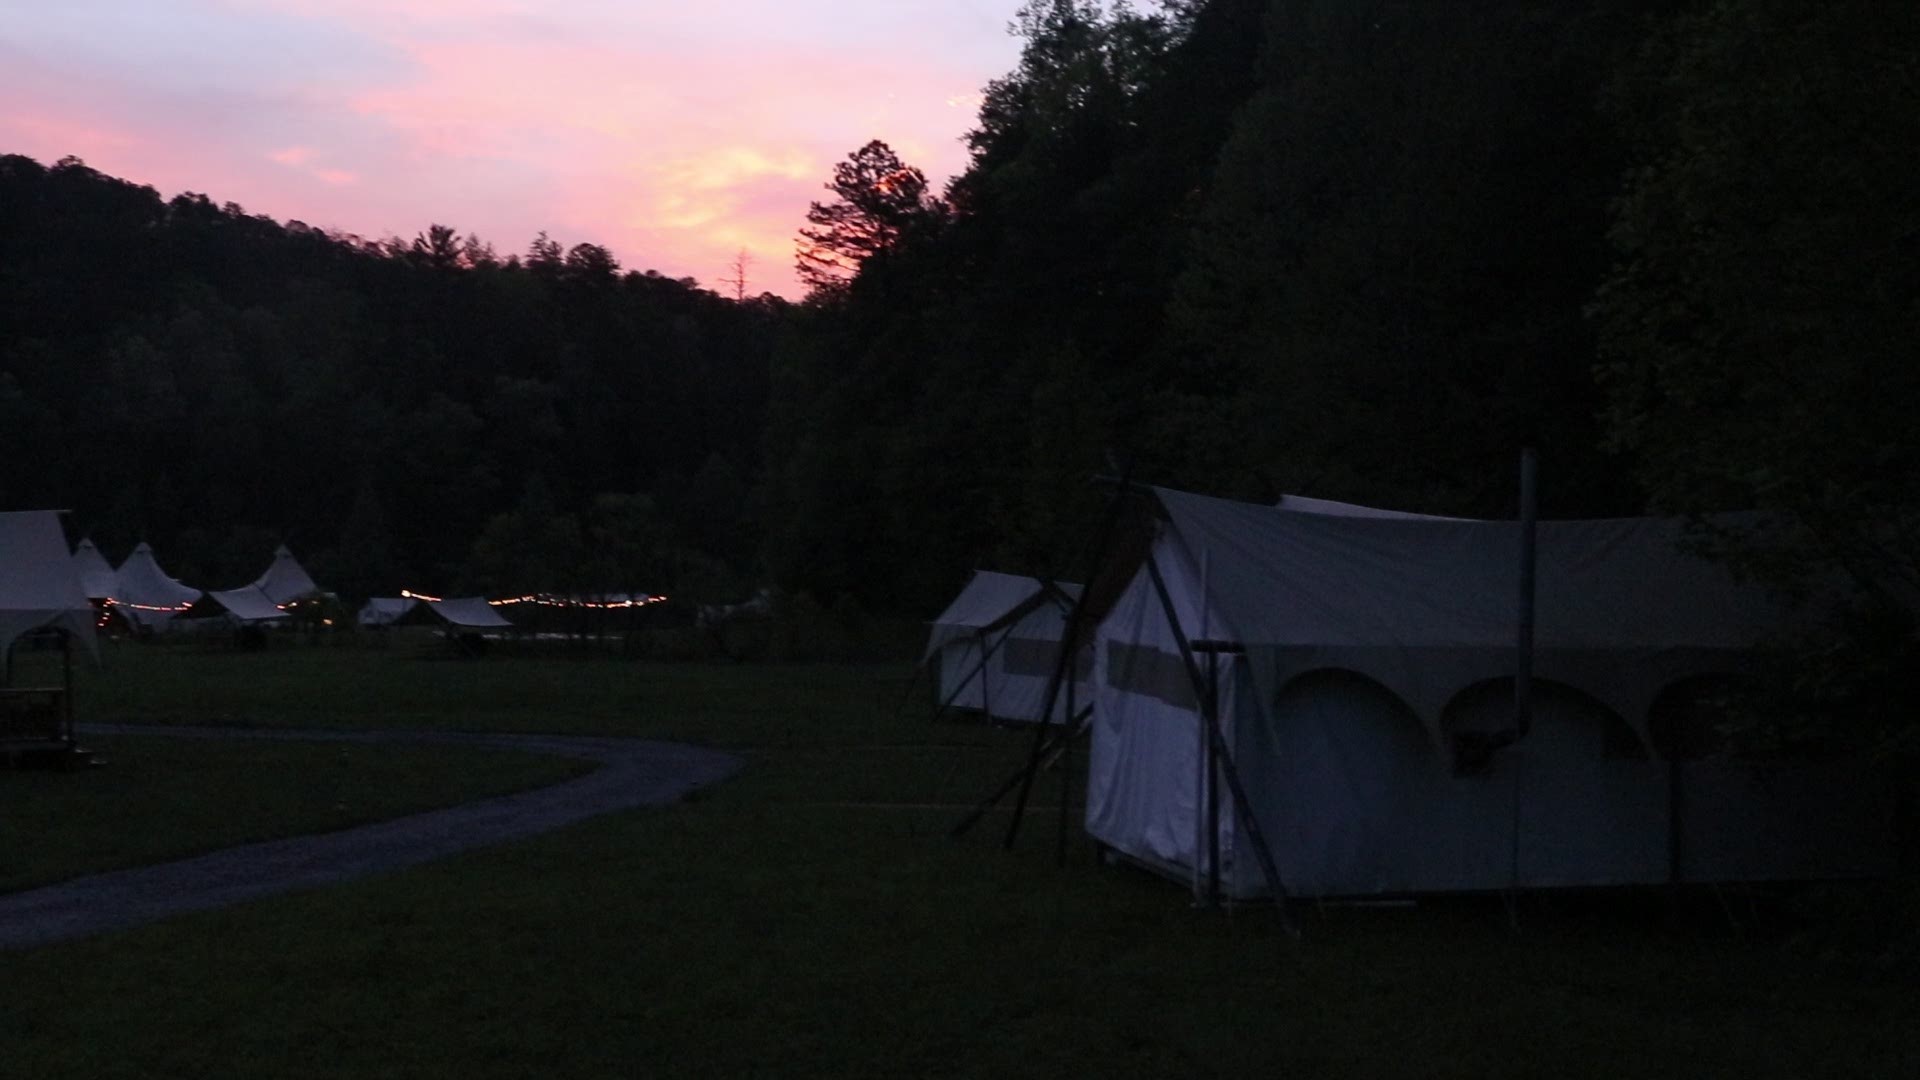 Sunrise at Under Canvas is breathtaking.